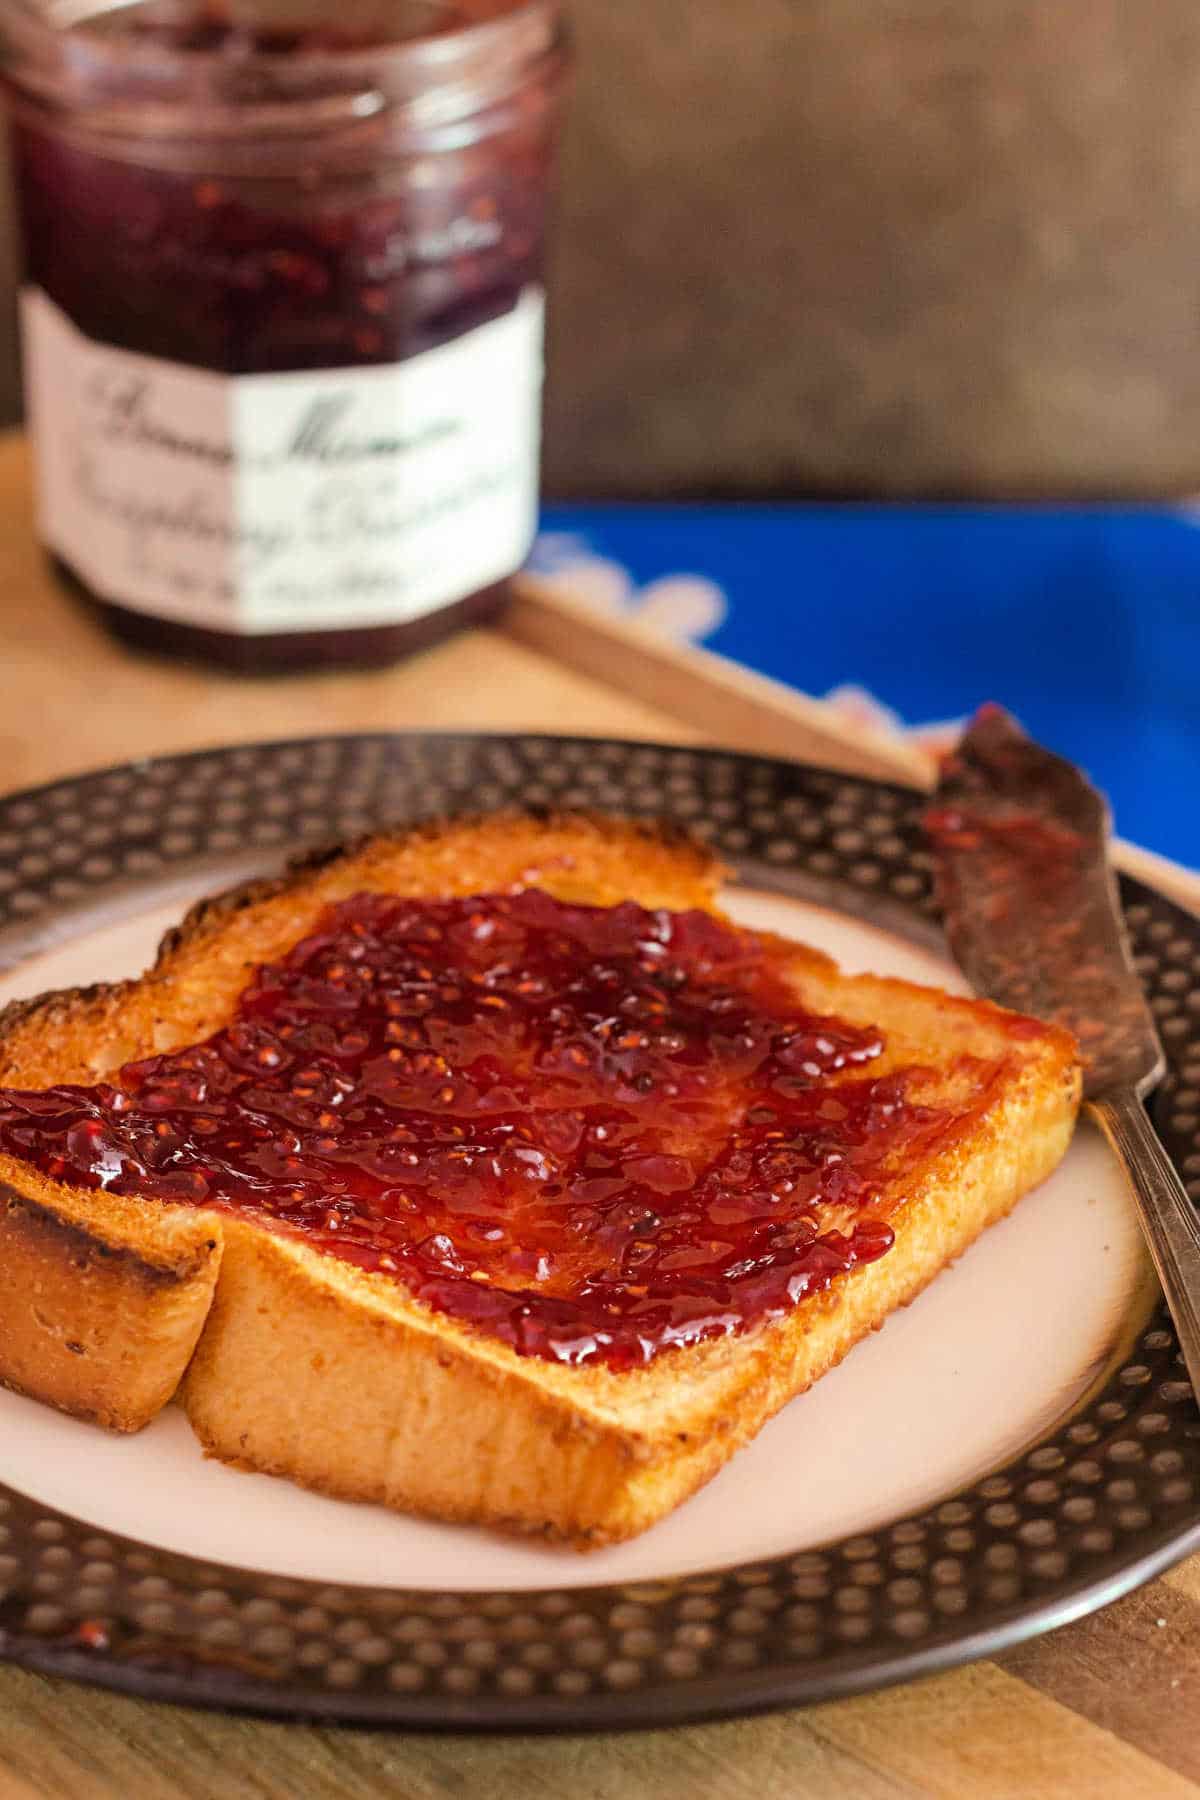 Toasted grits bread slice with raspberry jam.